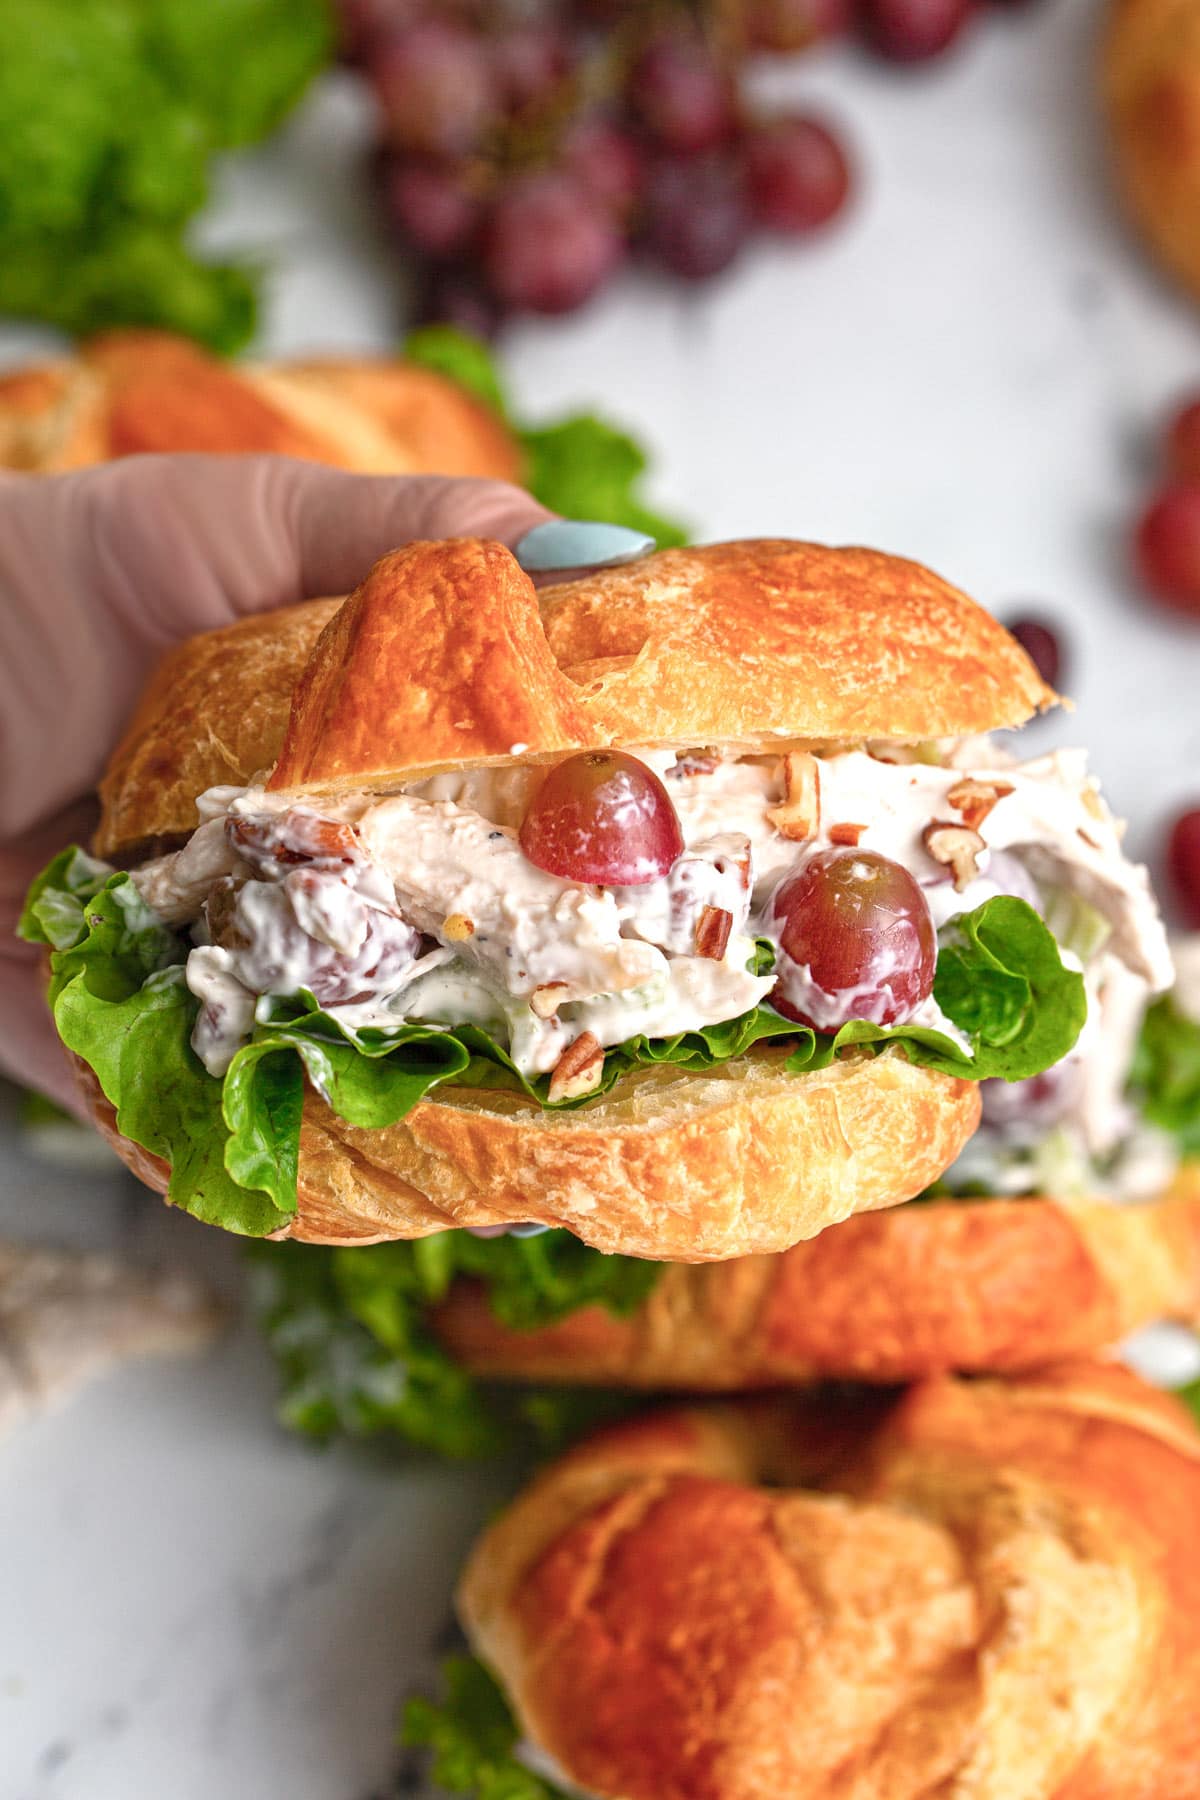 A generously packed chicken salad croissant sandwich.